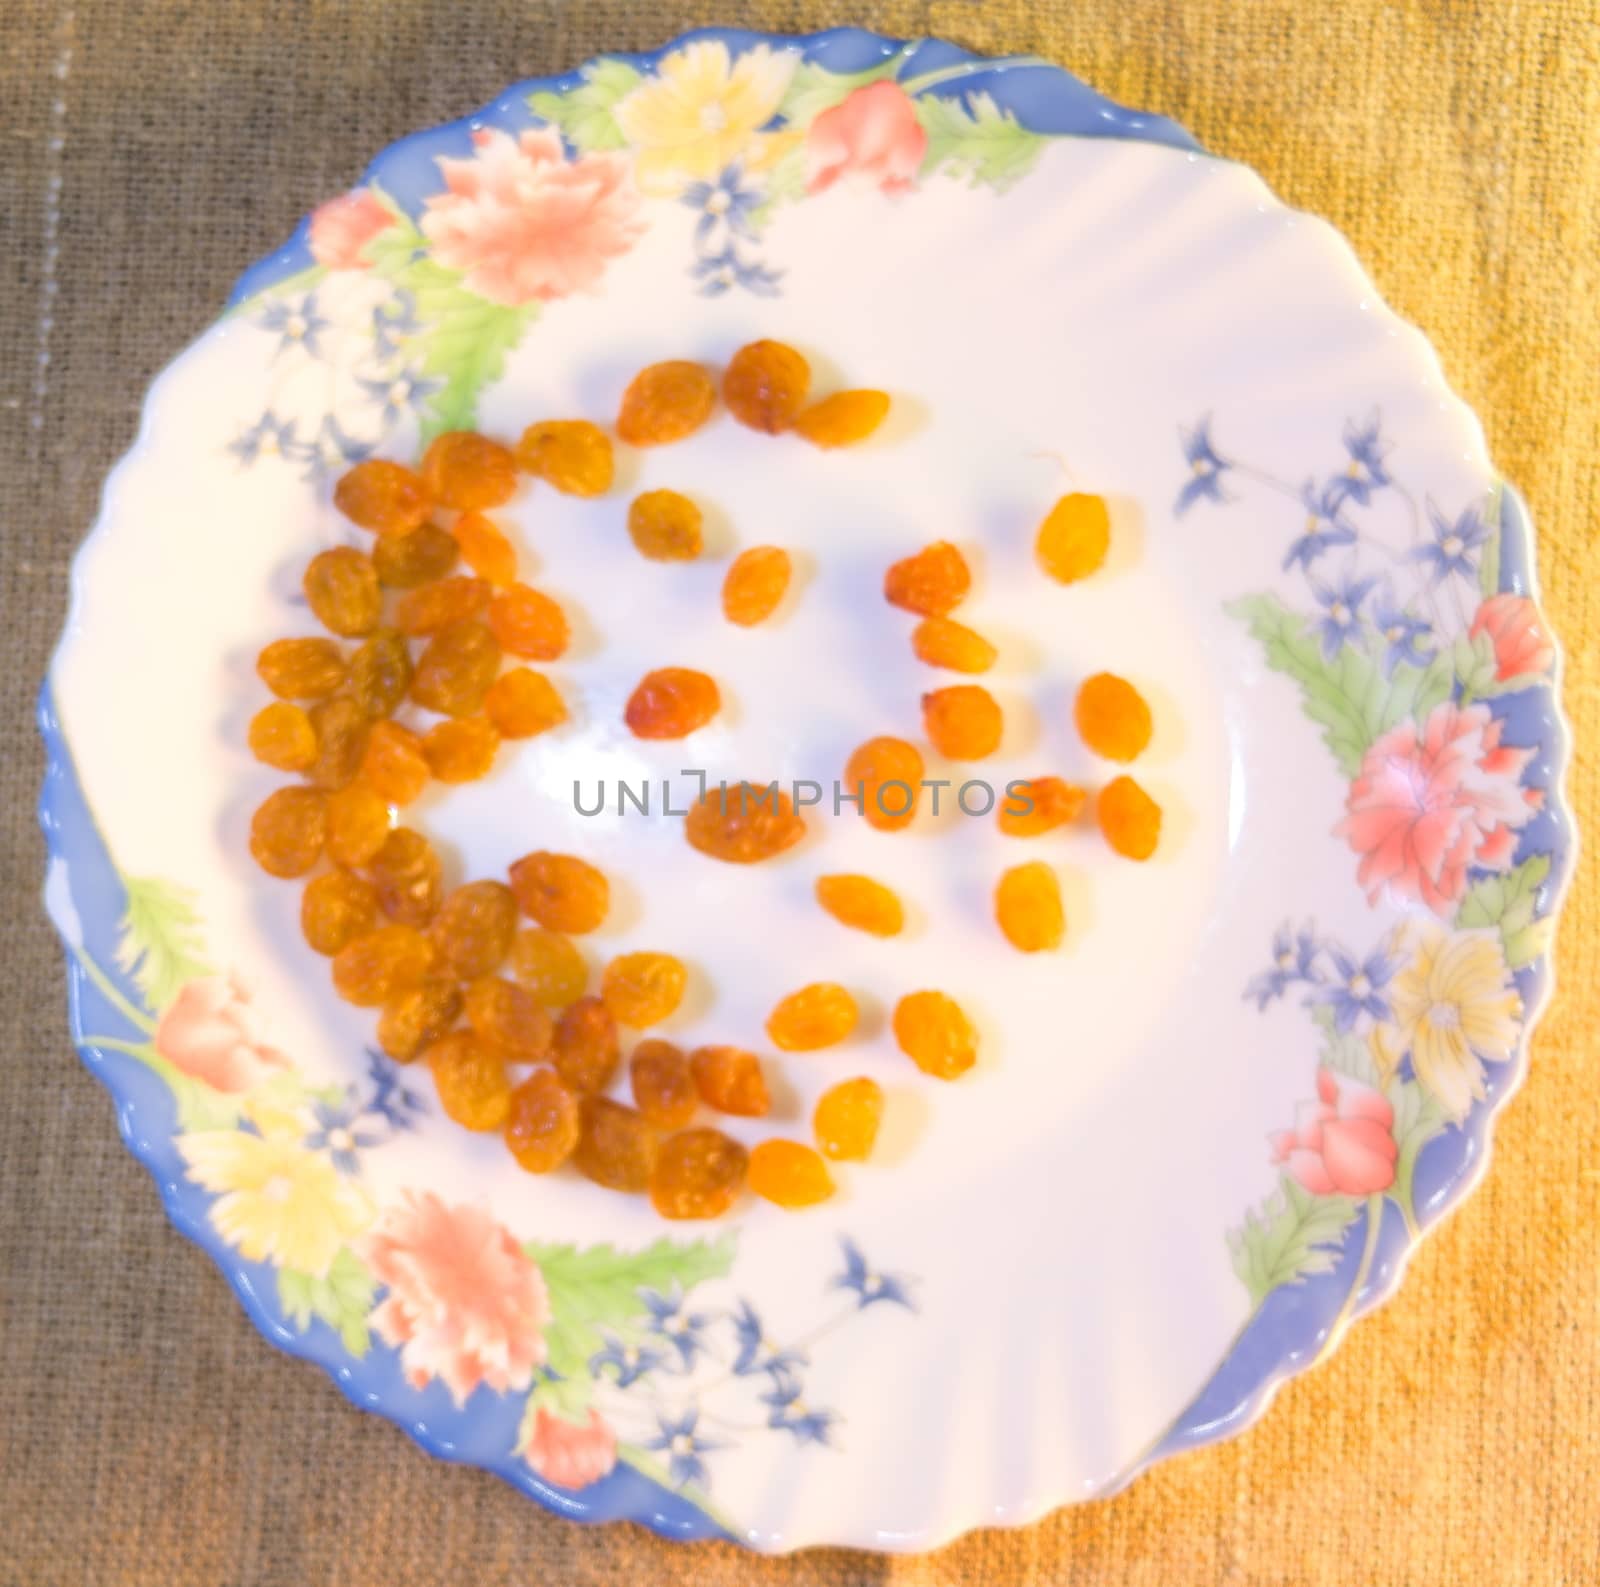 light yellow raisins are scattered on a beautiful white plate decorated with flowers